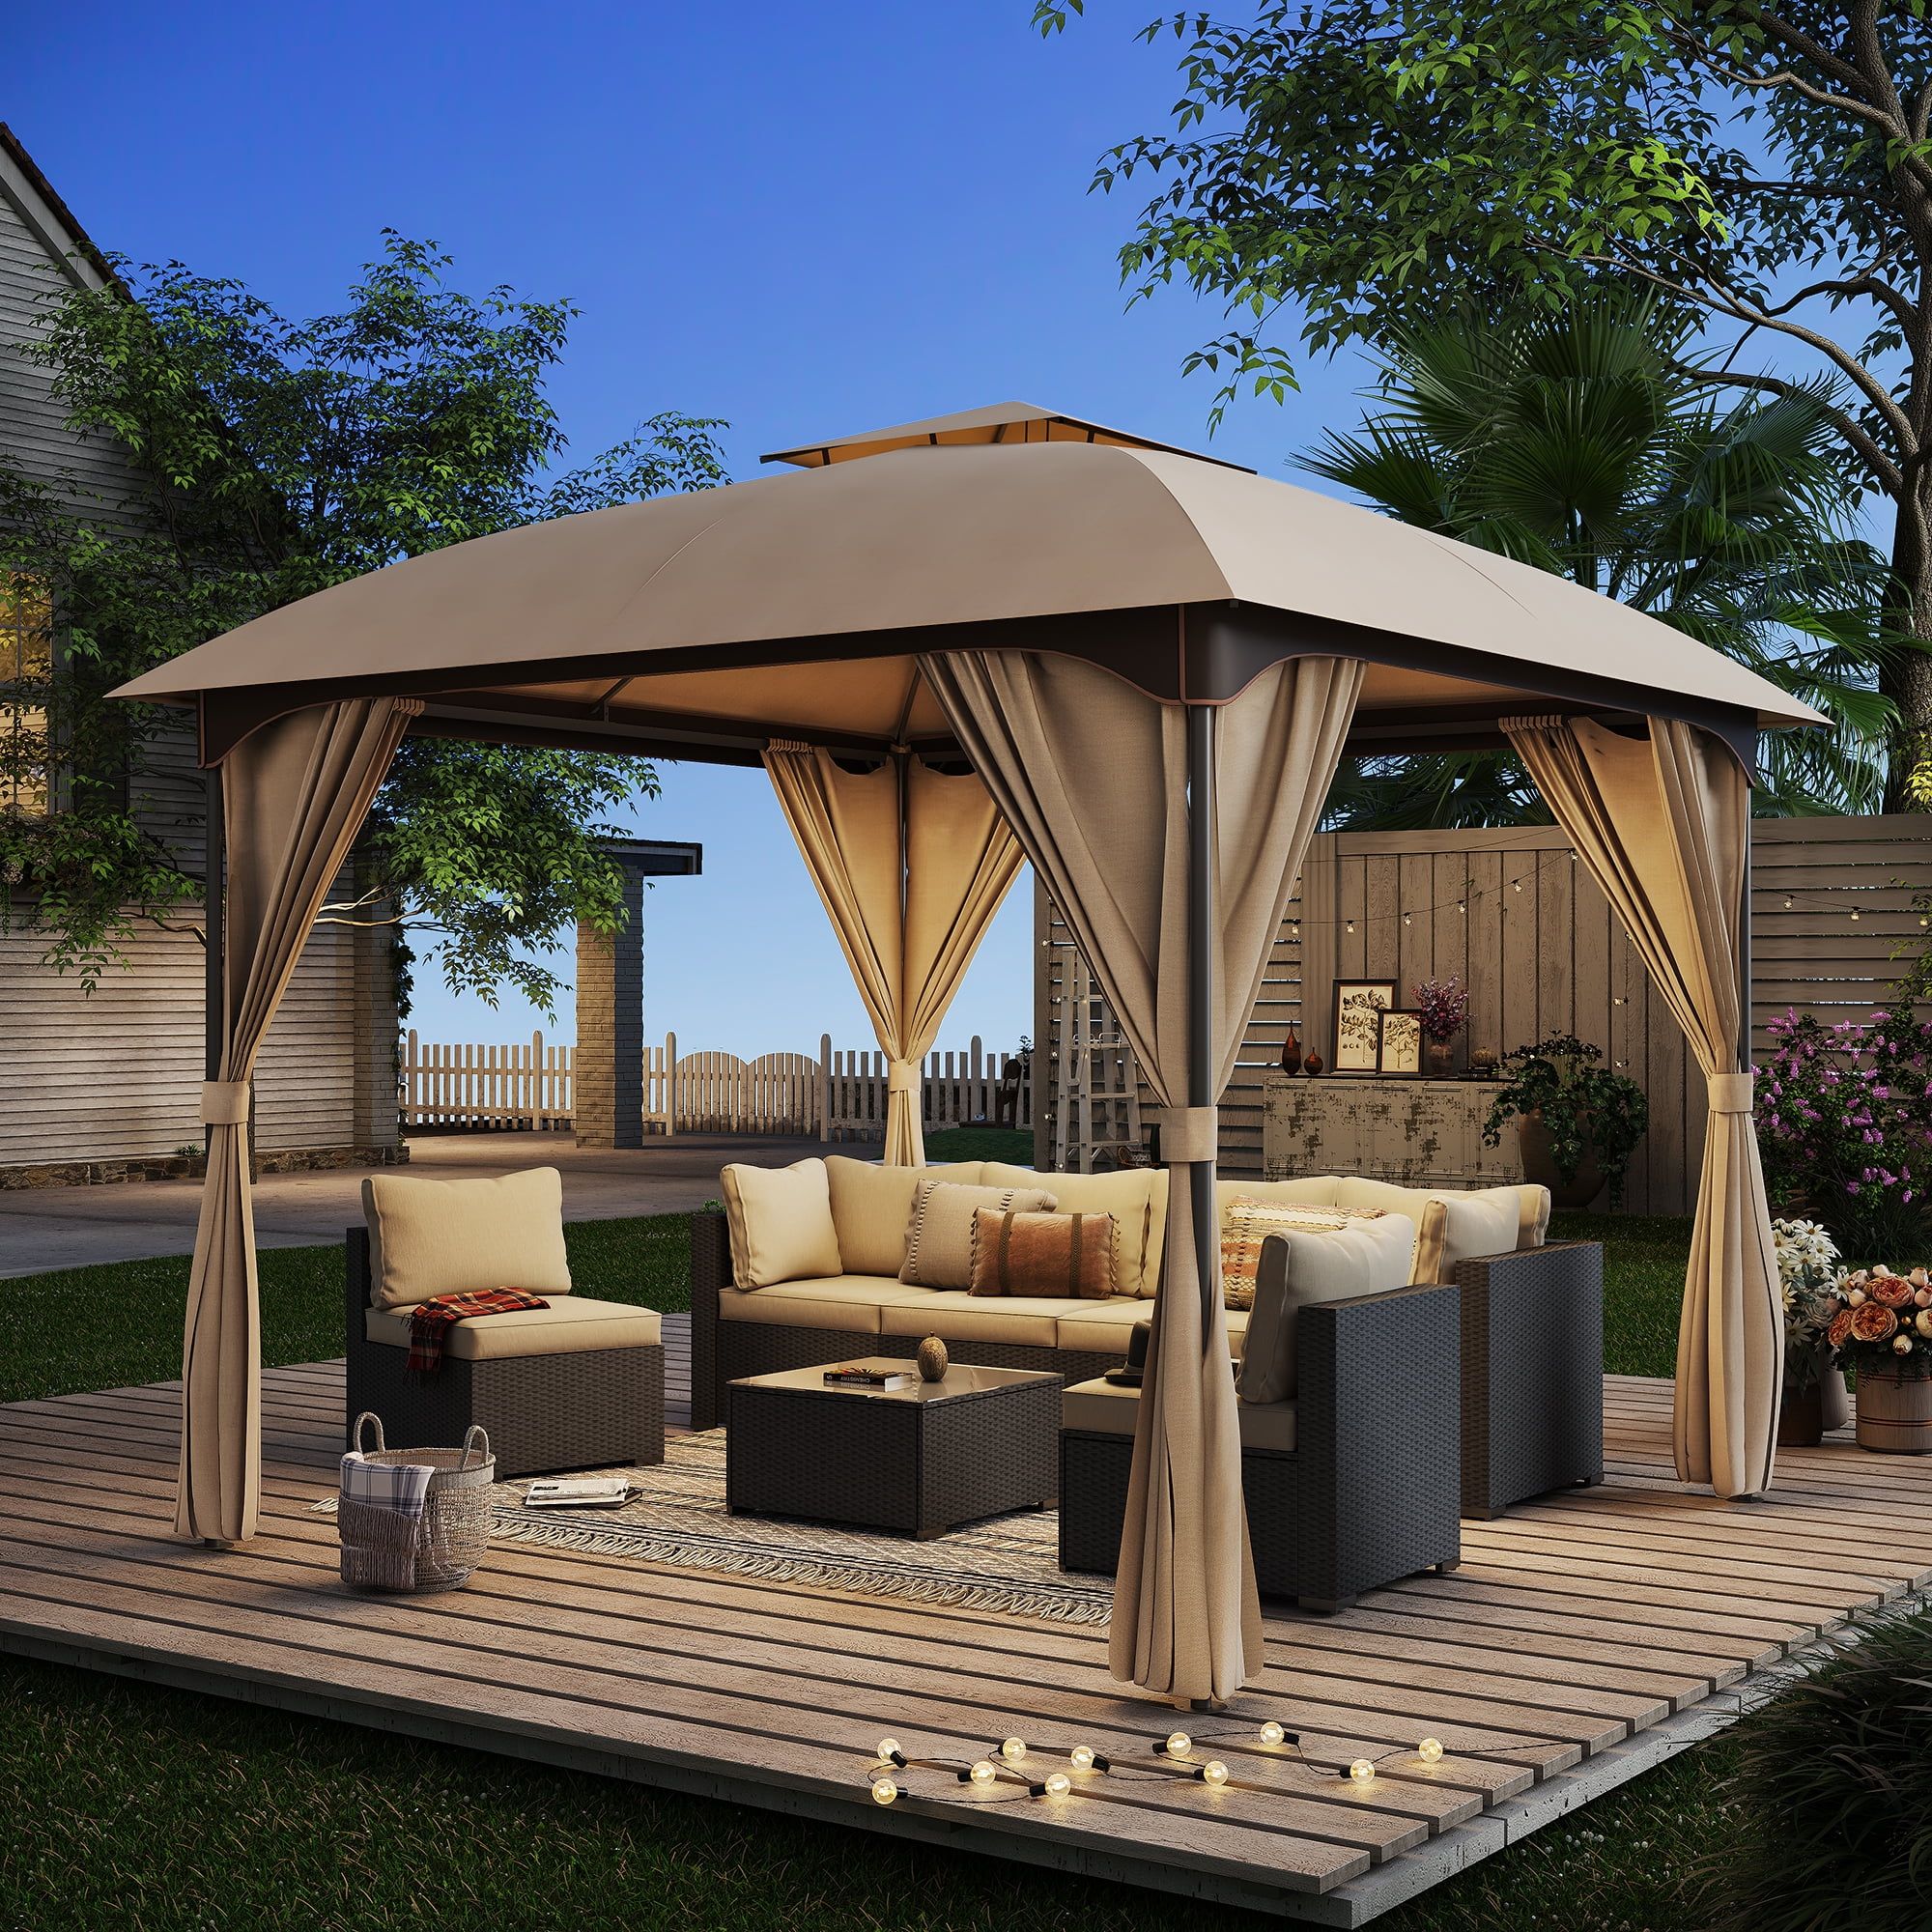 LAUSAINT HOME 10'x10' Outdoor Gazebo, Unique Arc Roof Design and Privacy Curtains Included, Khaki | Walmart (US)